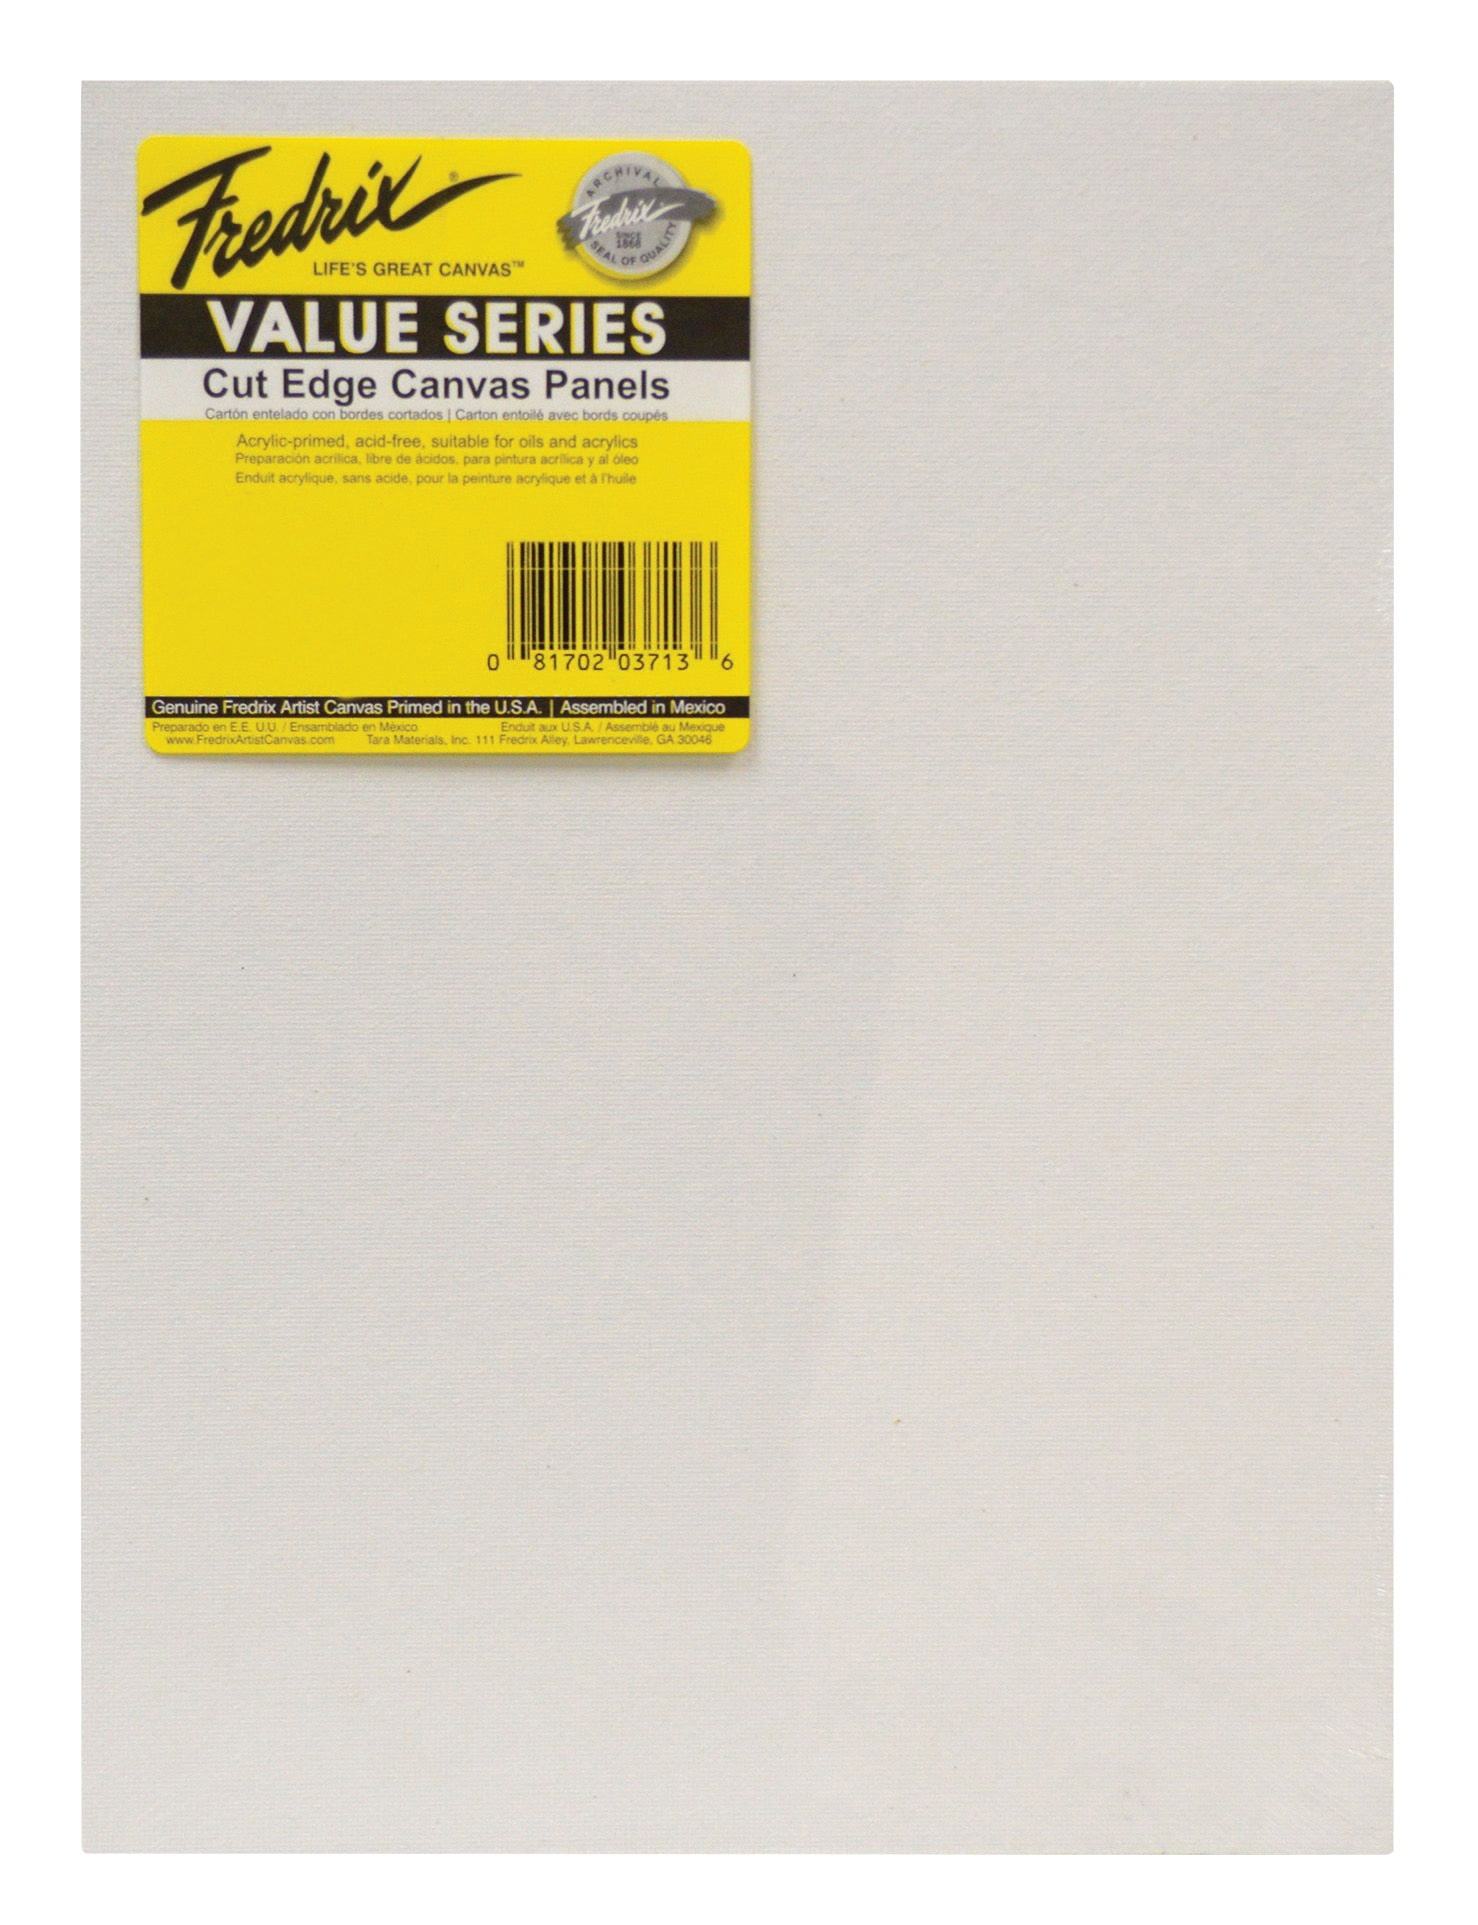 Triple Acrylic Primed Canvas on a Wood Frame 9” x 12” Canvas for Oil or Acrylic Paints Darice Studio 71 Medium Weight Traditional Stretched Canvas